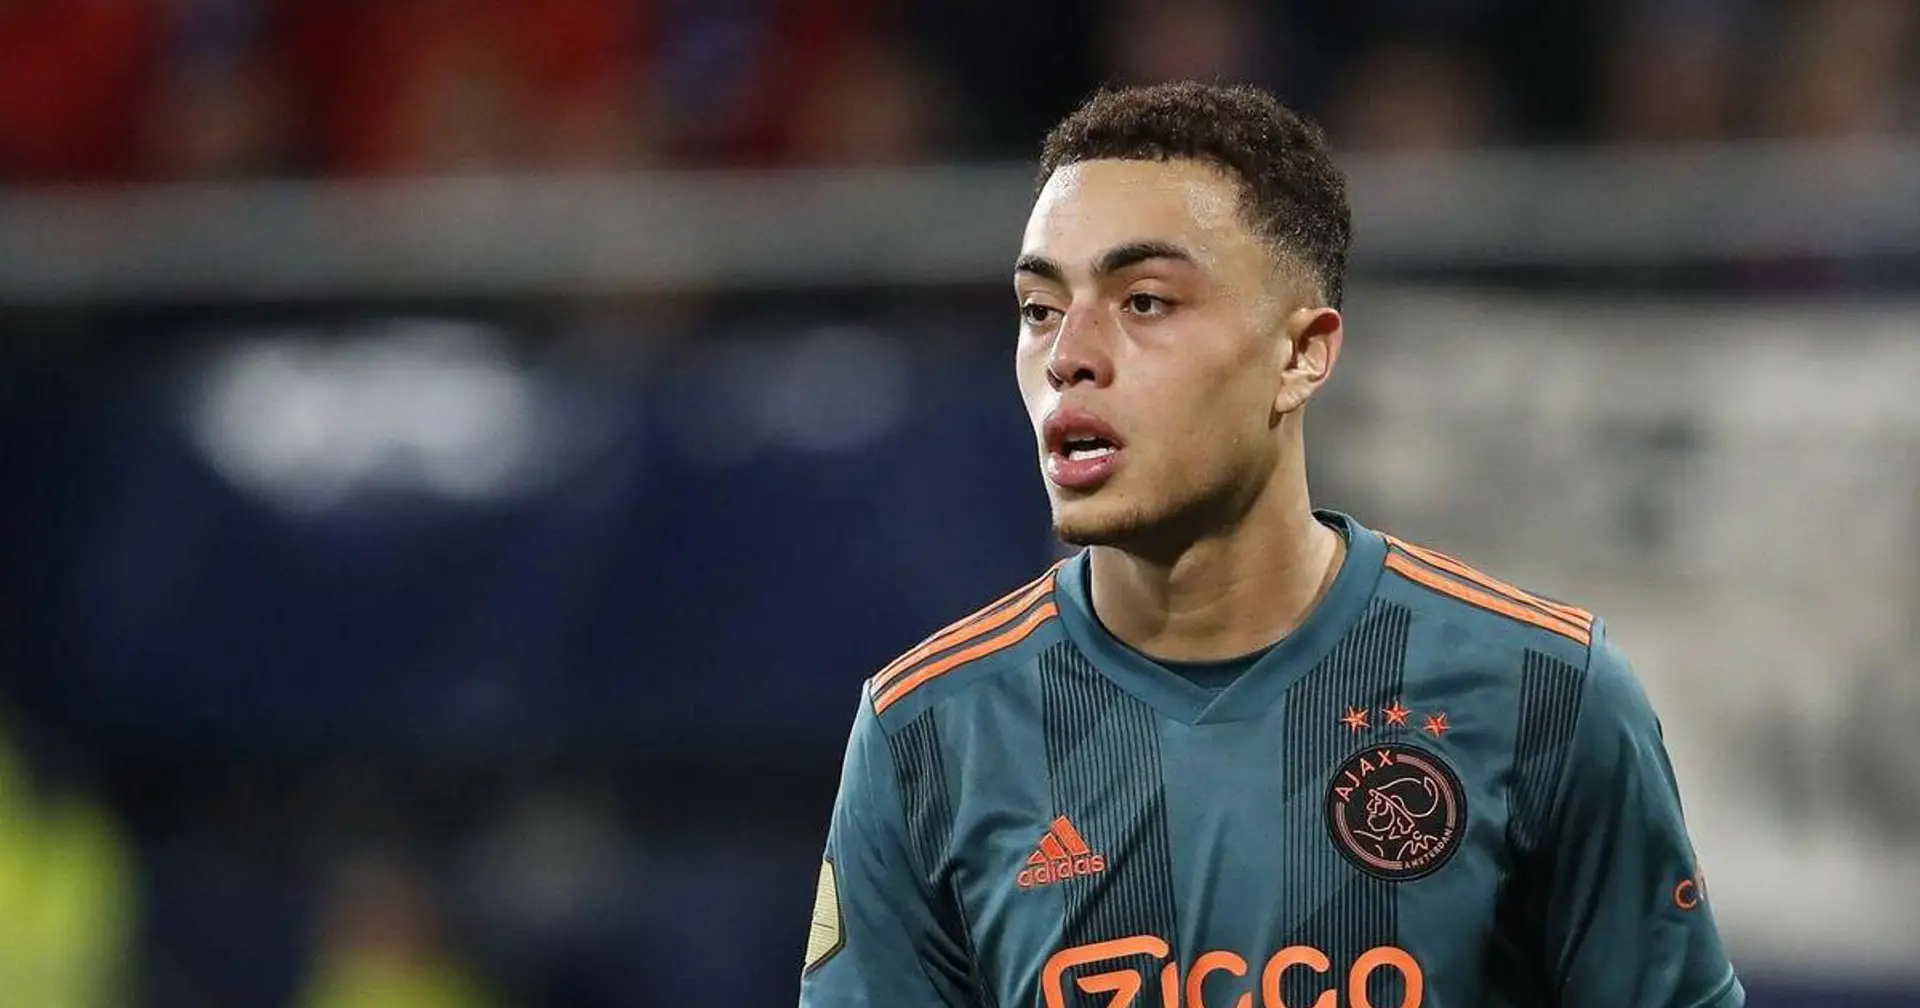 Ajax boss opens up on Sergino Dest's future amid Barca and Bayern links